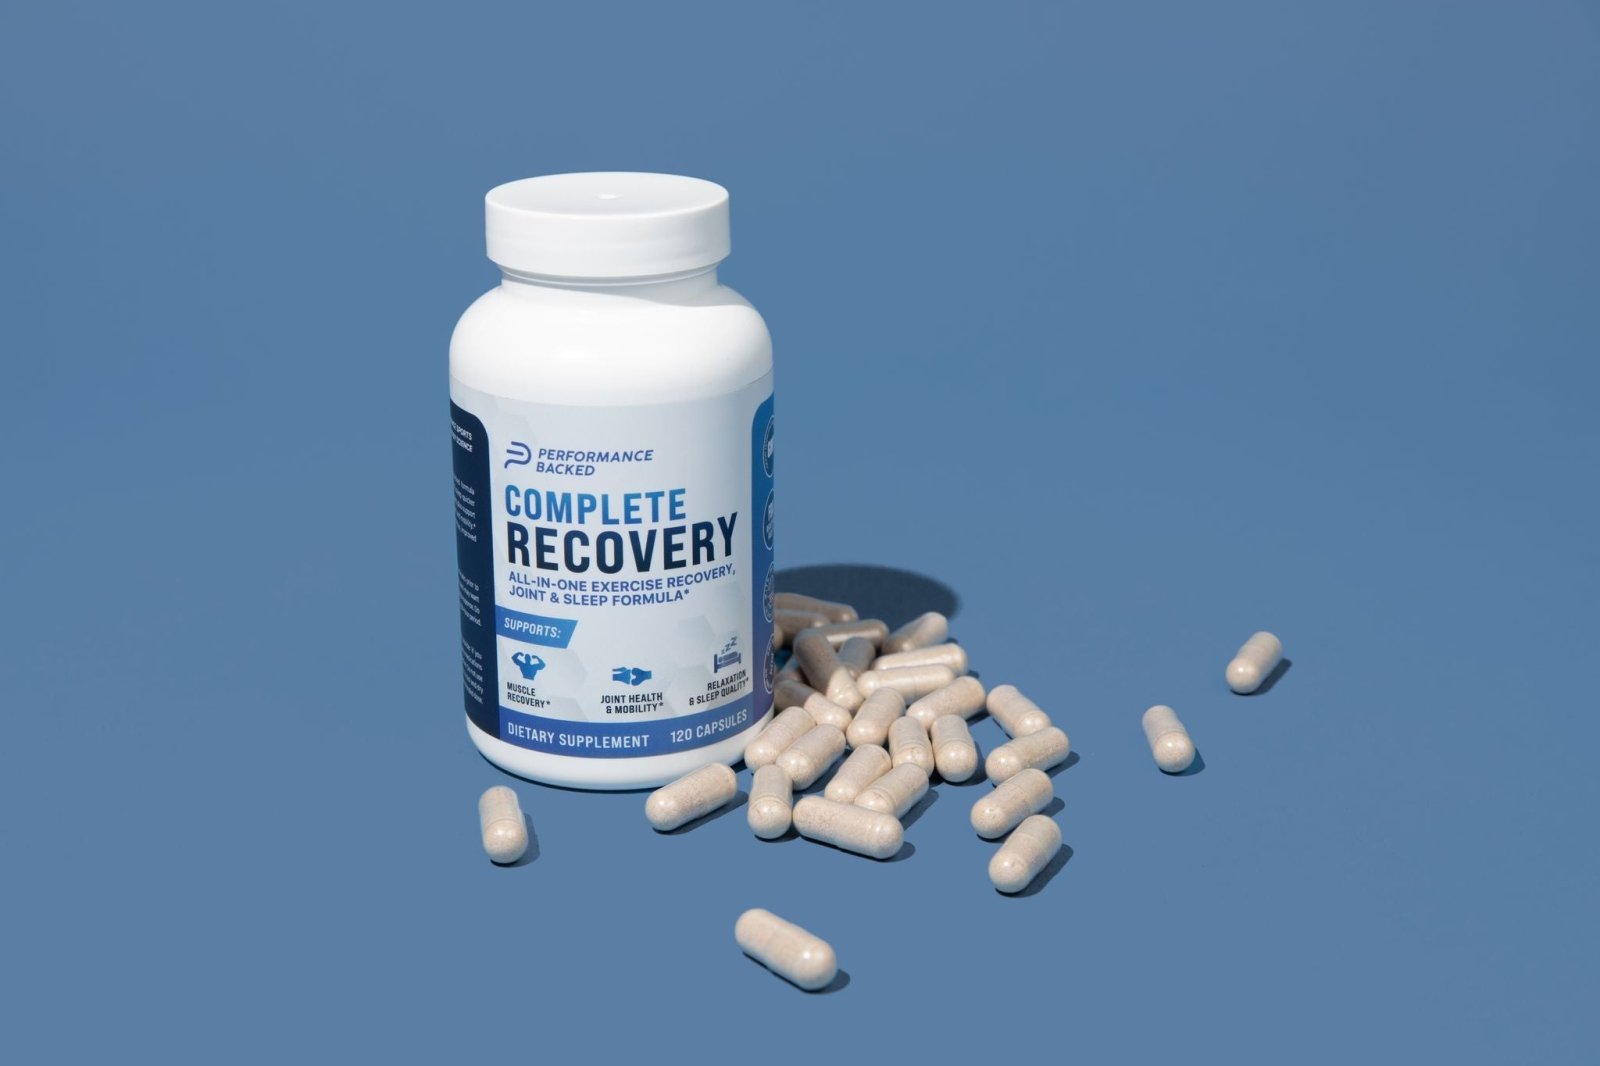 Maximizing Your Sleep and Recovery with Complete Recovery - Performance Backed